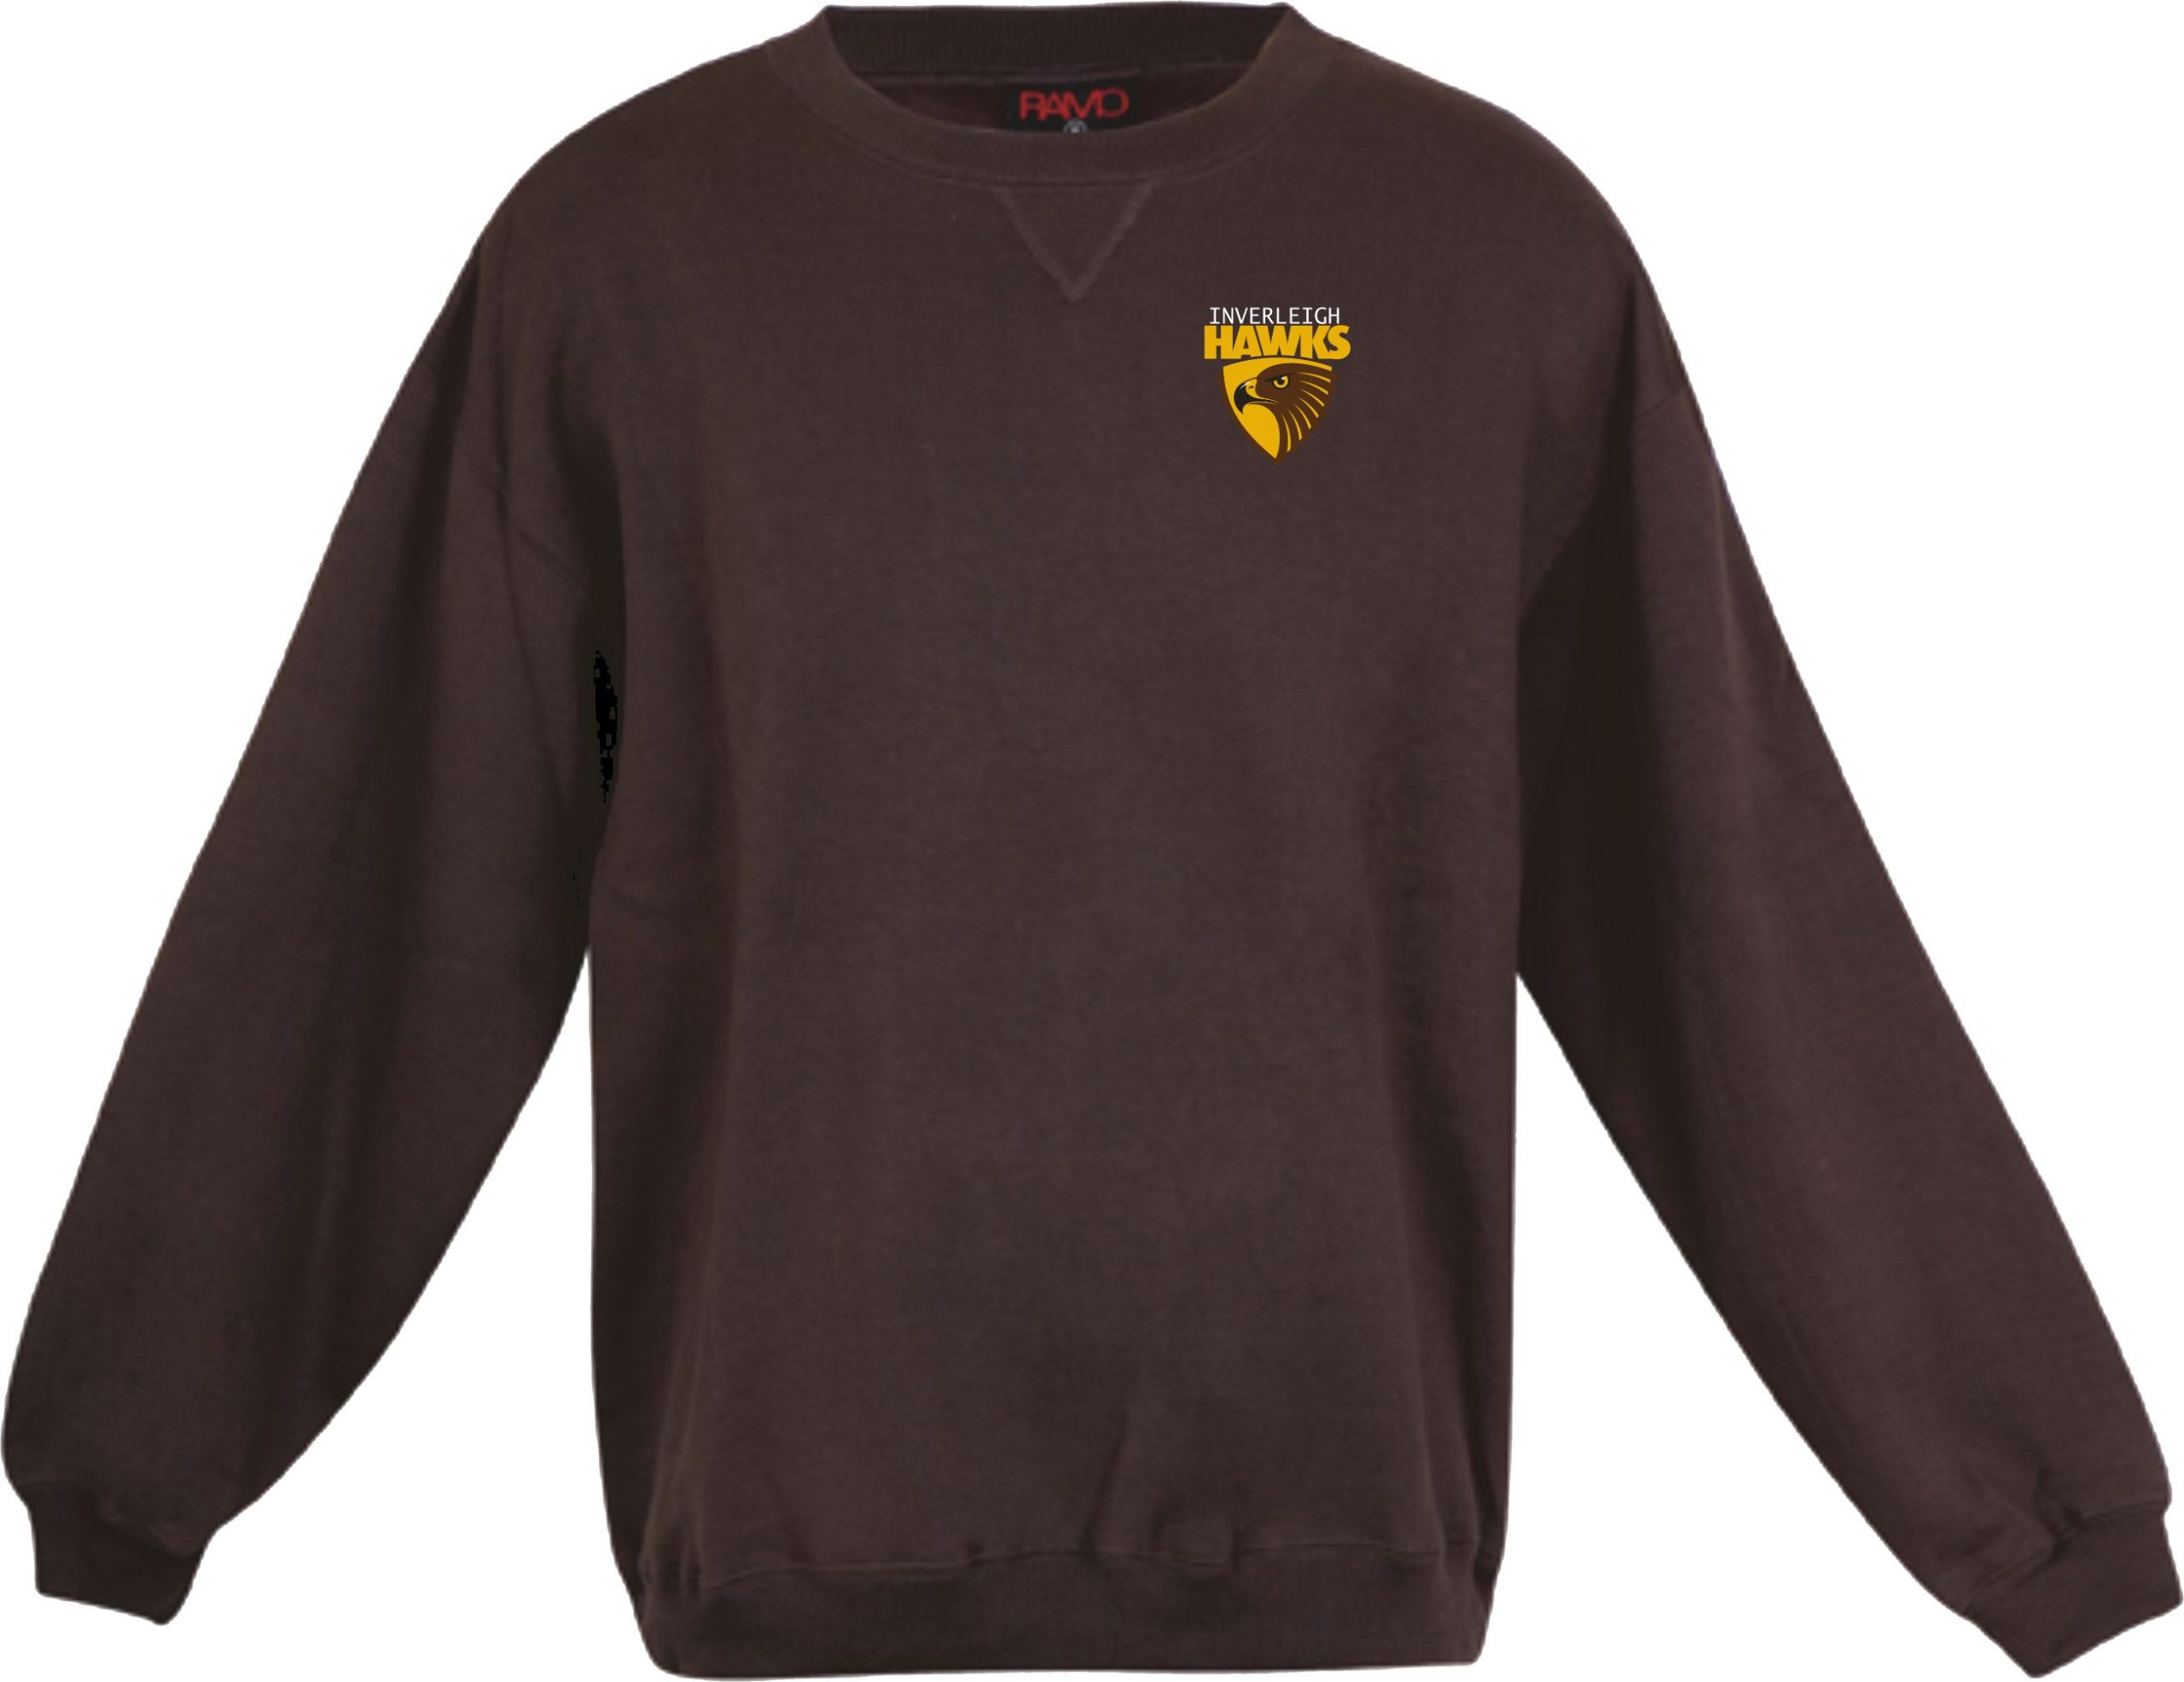 Unisex Crew Neck Sweat in Brown or Grey Marle